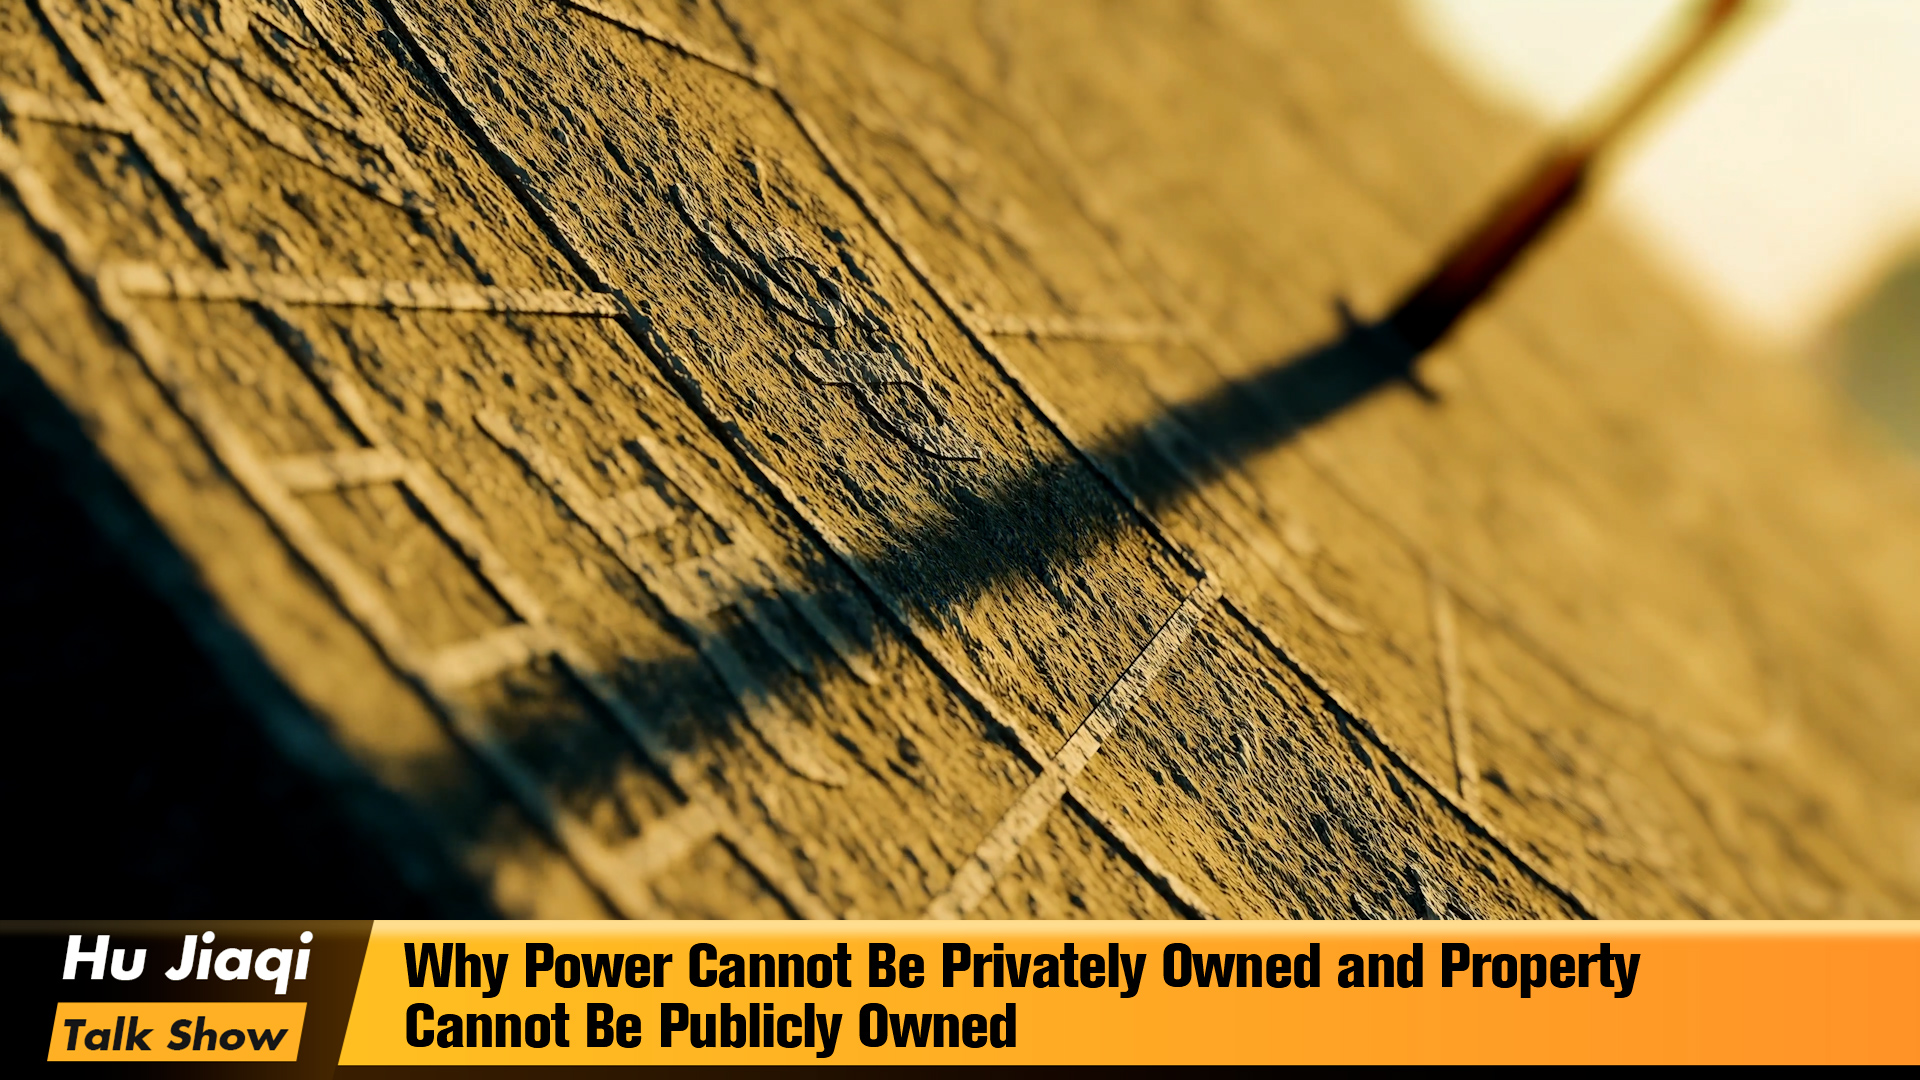 Why Power Cannot Be Privately Owned and Property Cannot Be Publicly Owned